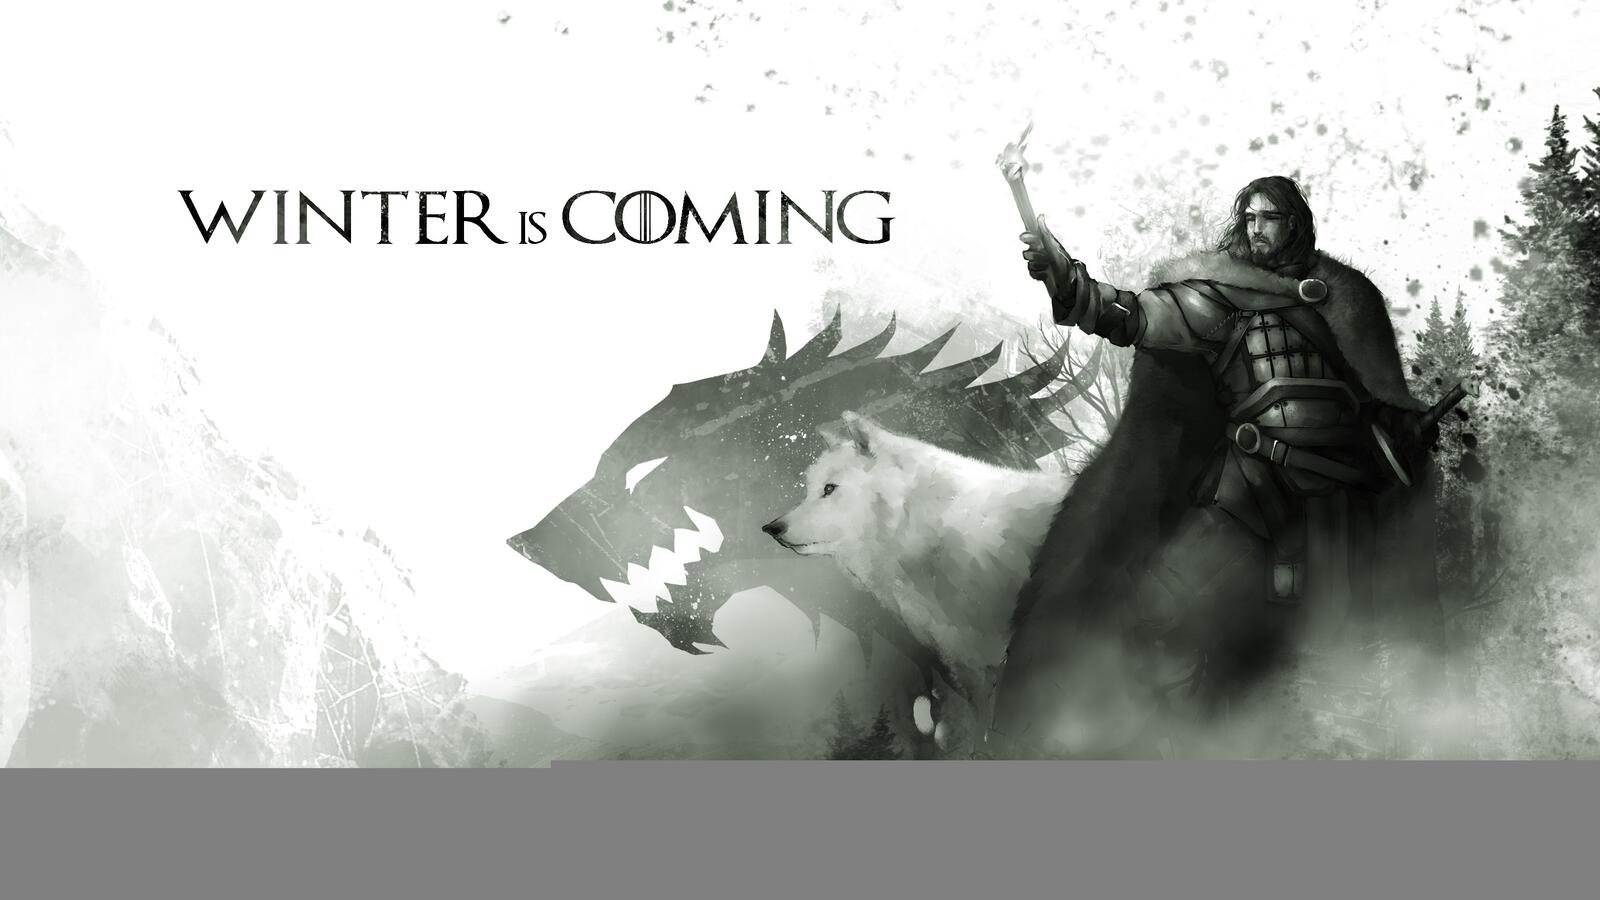 Wallpapers monochrome Game Of Thrones image on the desktop